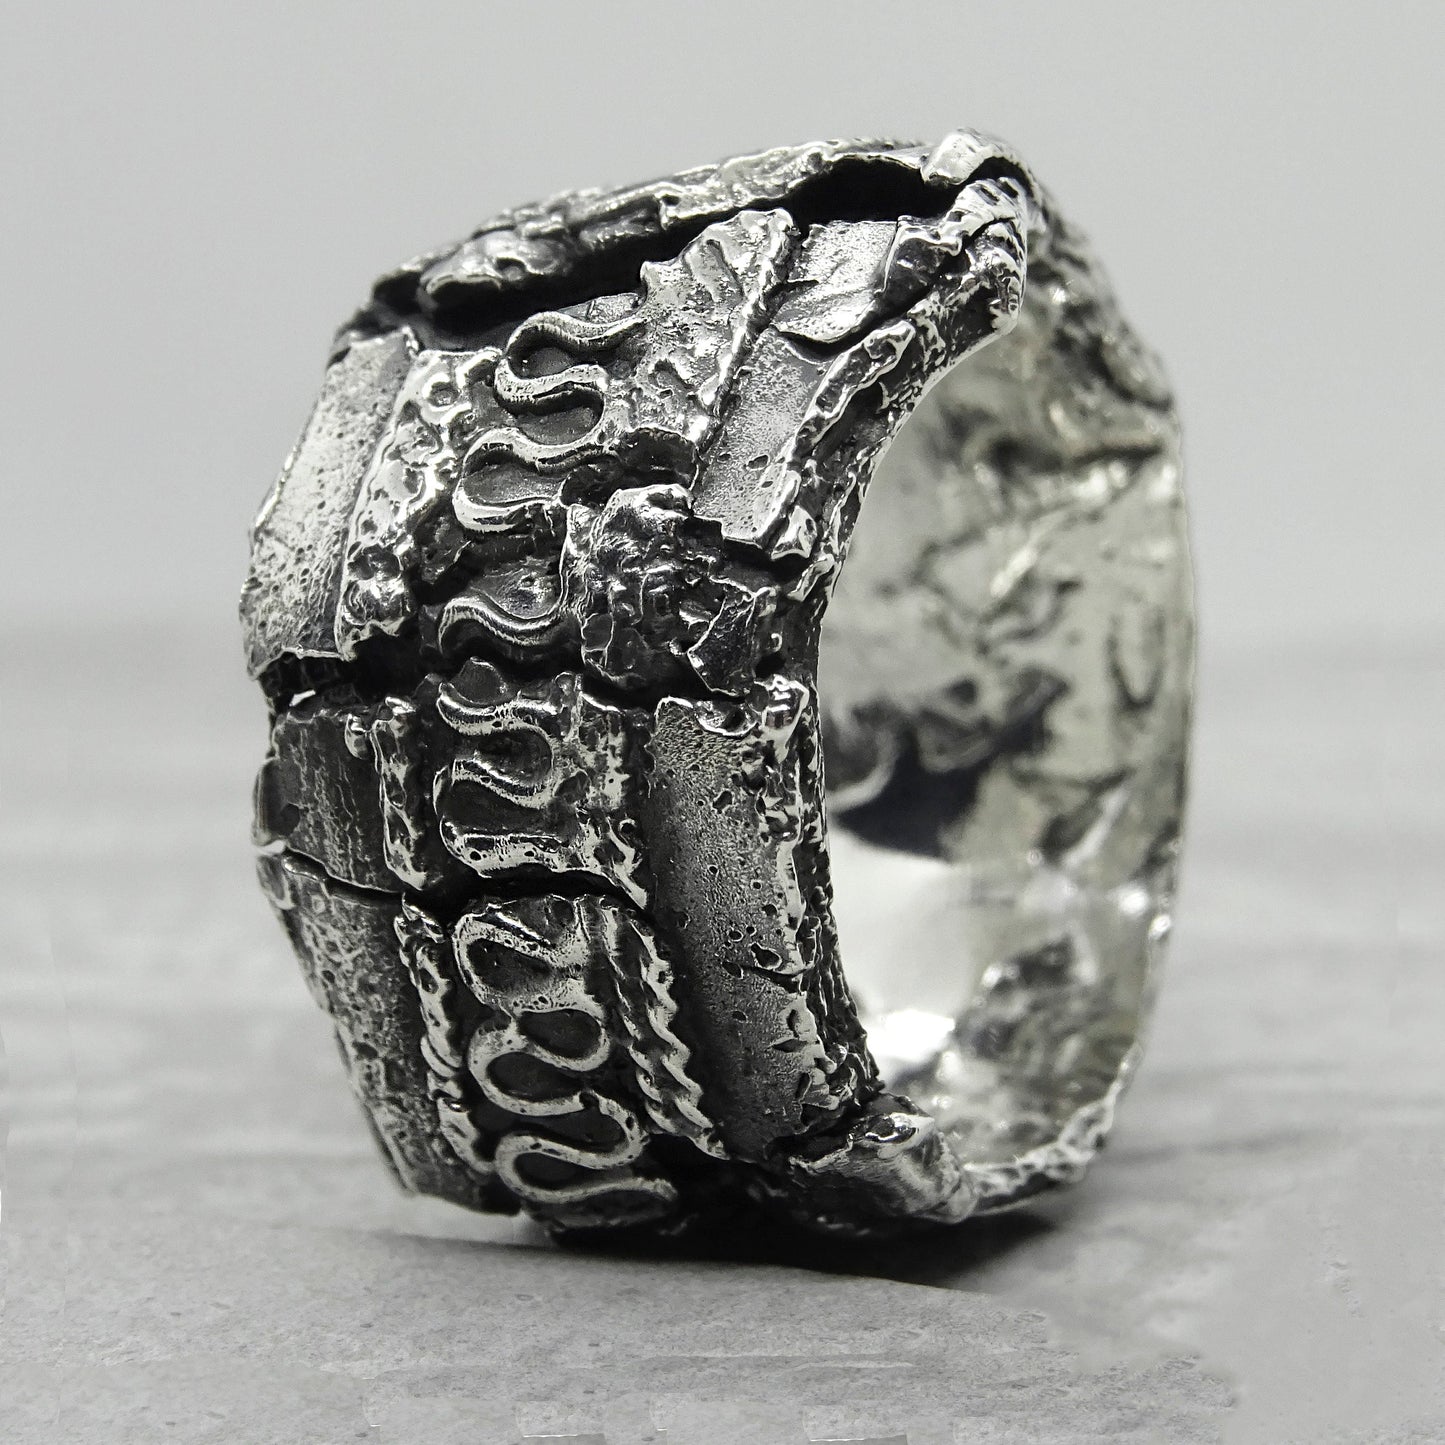 Old Istanbul ring - wide brutal ring with an oriental pattern and cracks Unusual rings Project50g 